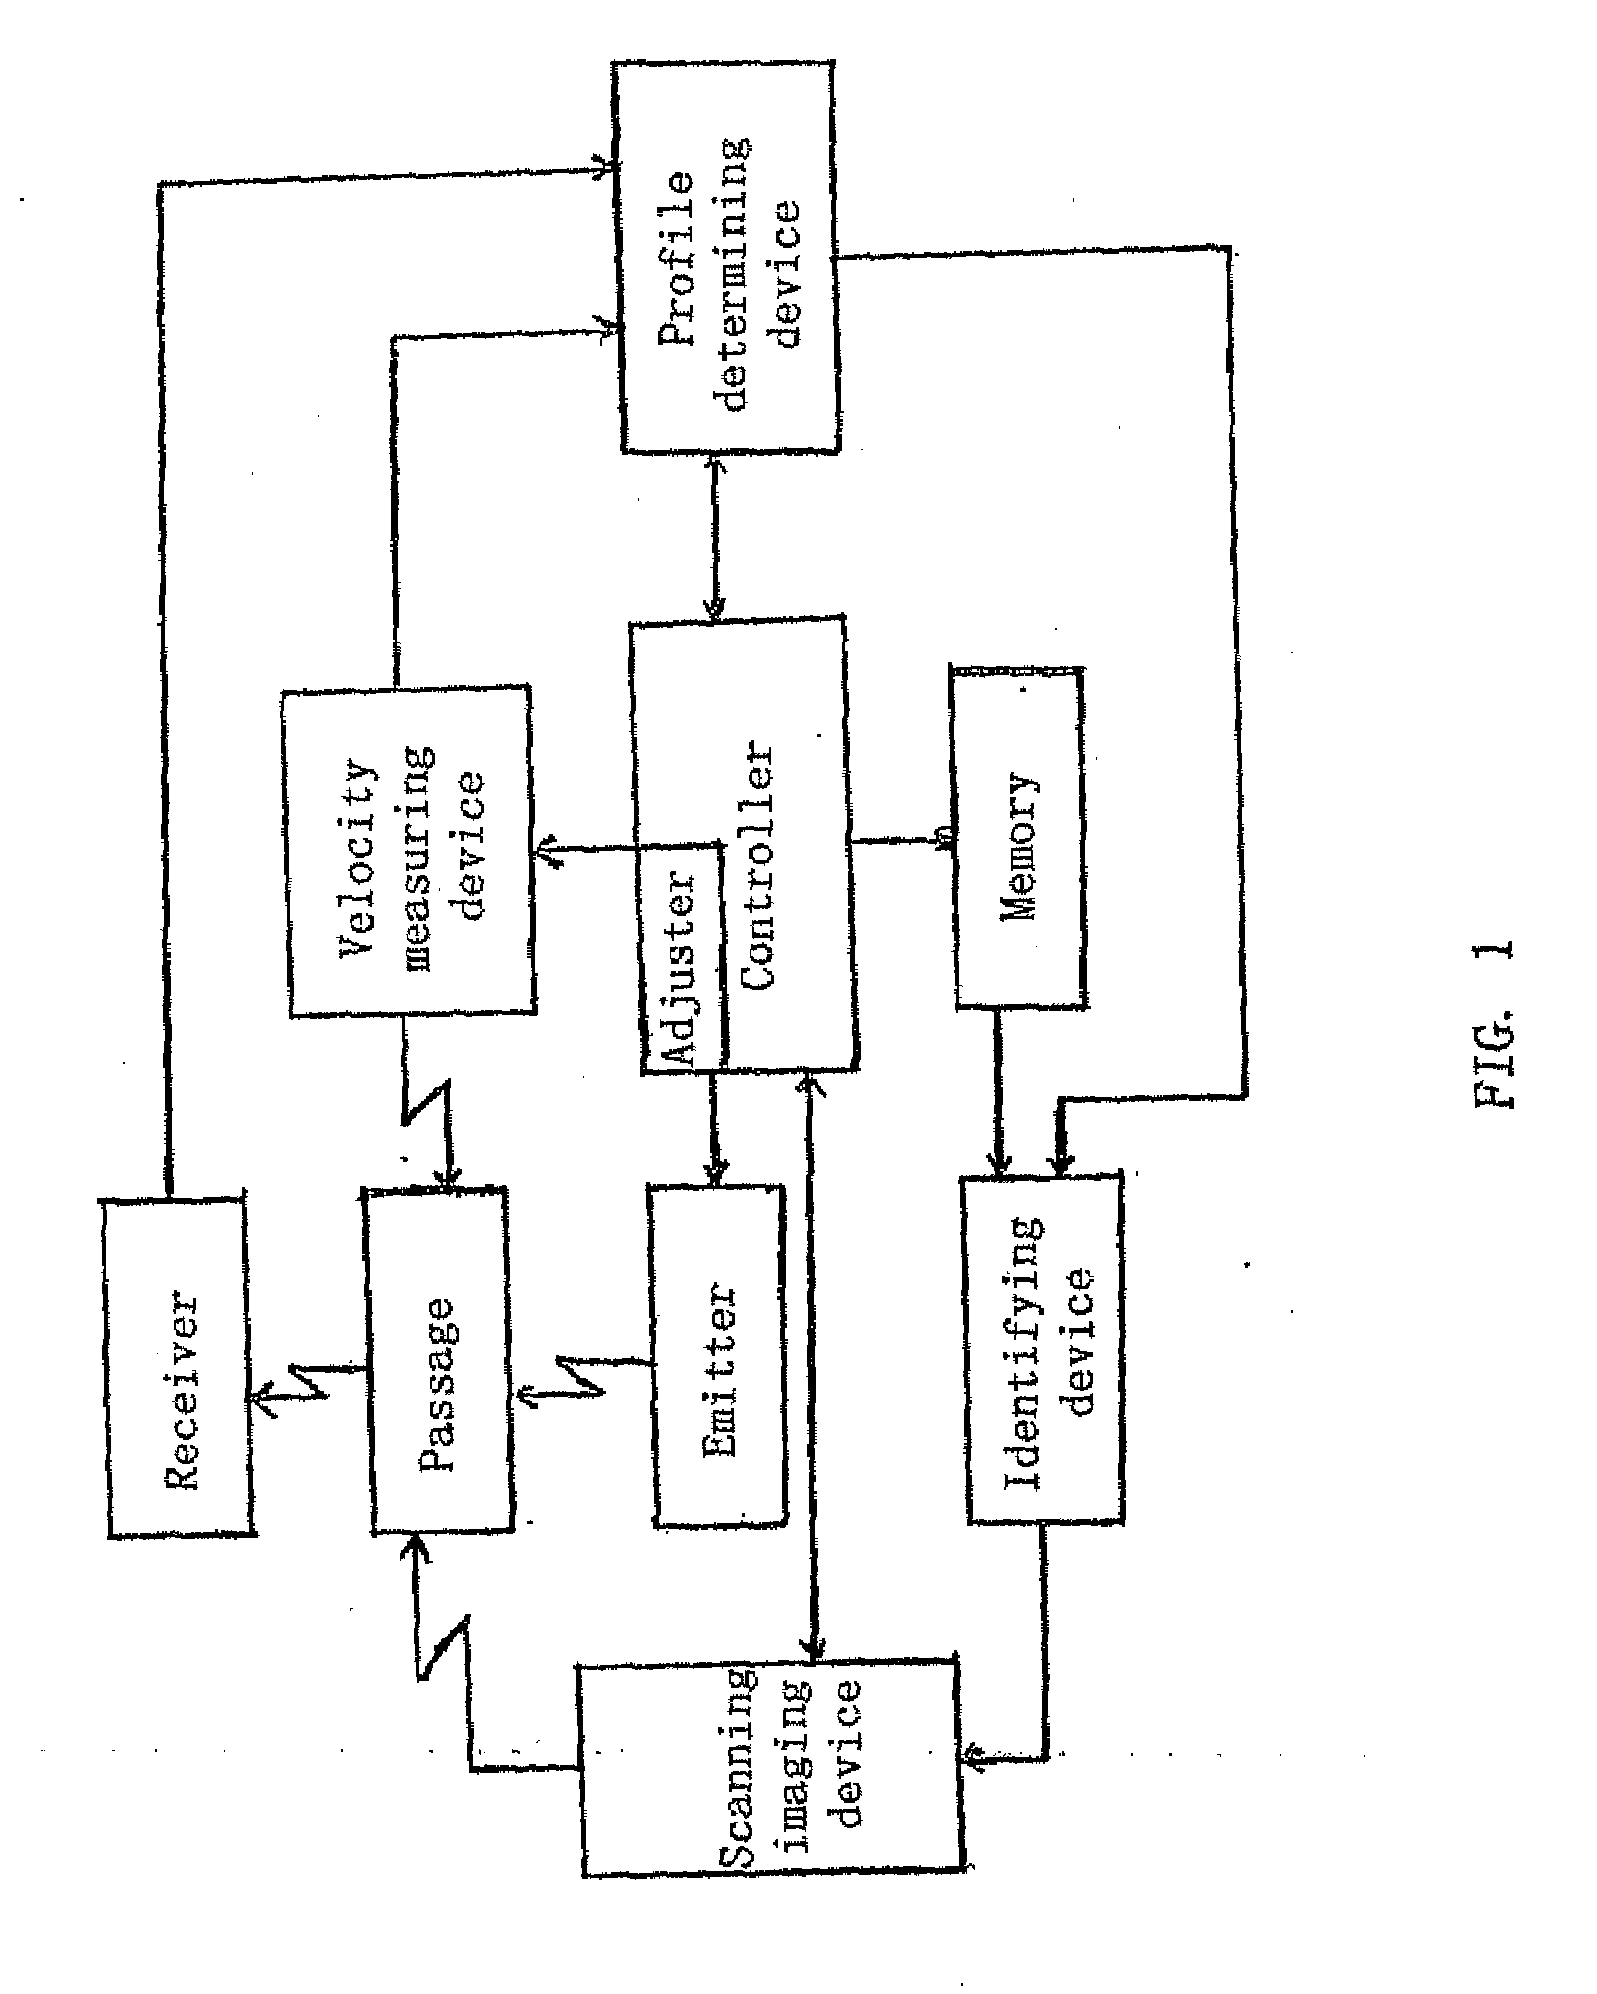 Method and system for identifying moving object, and method and system for inspecting moving object by radiation imaging